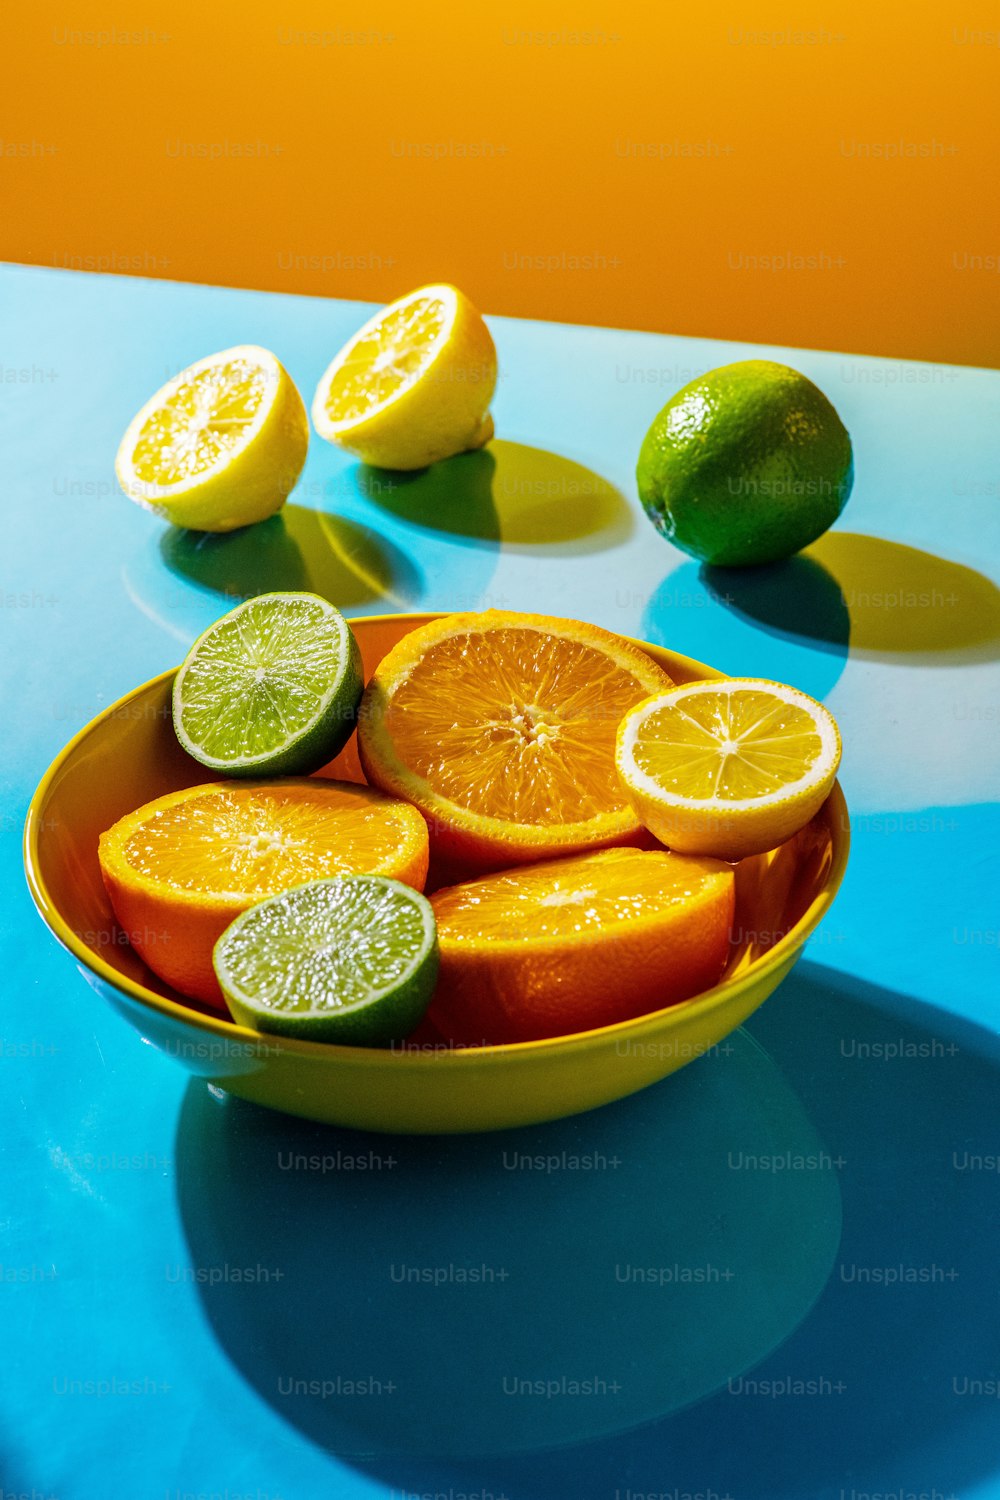 a bowl of oranges and limes on a table